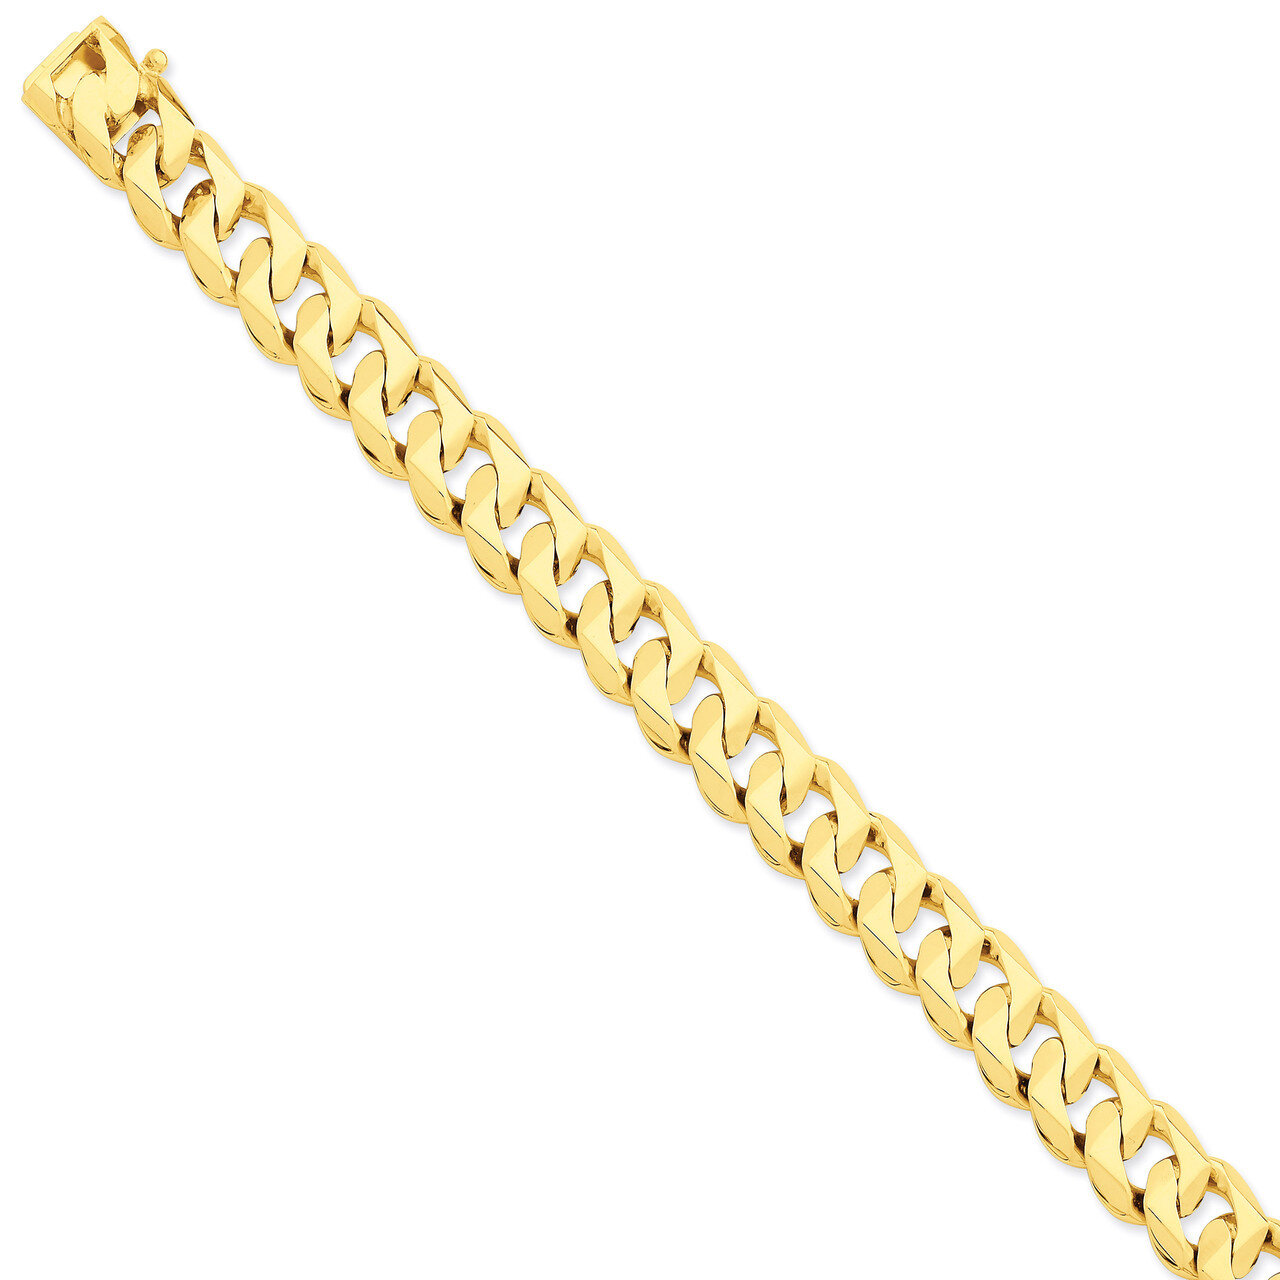 11mm Hand-Polished Traditional Link Chain 24 Inch 14k Gold LK120-24